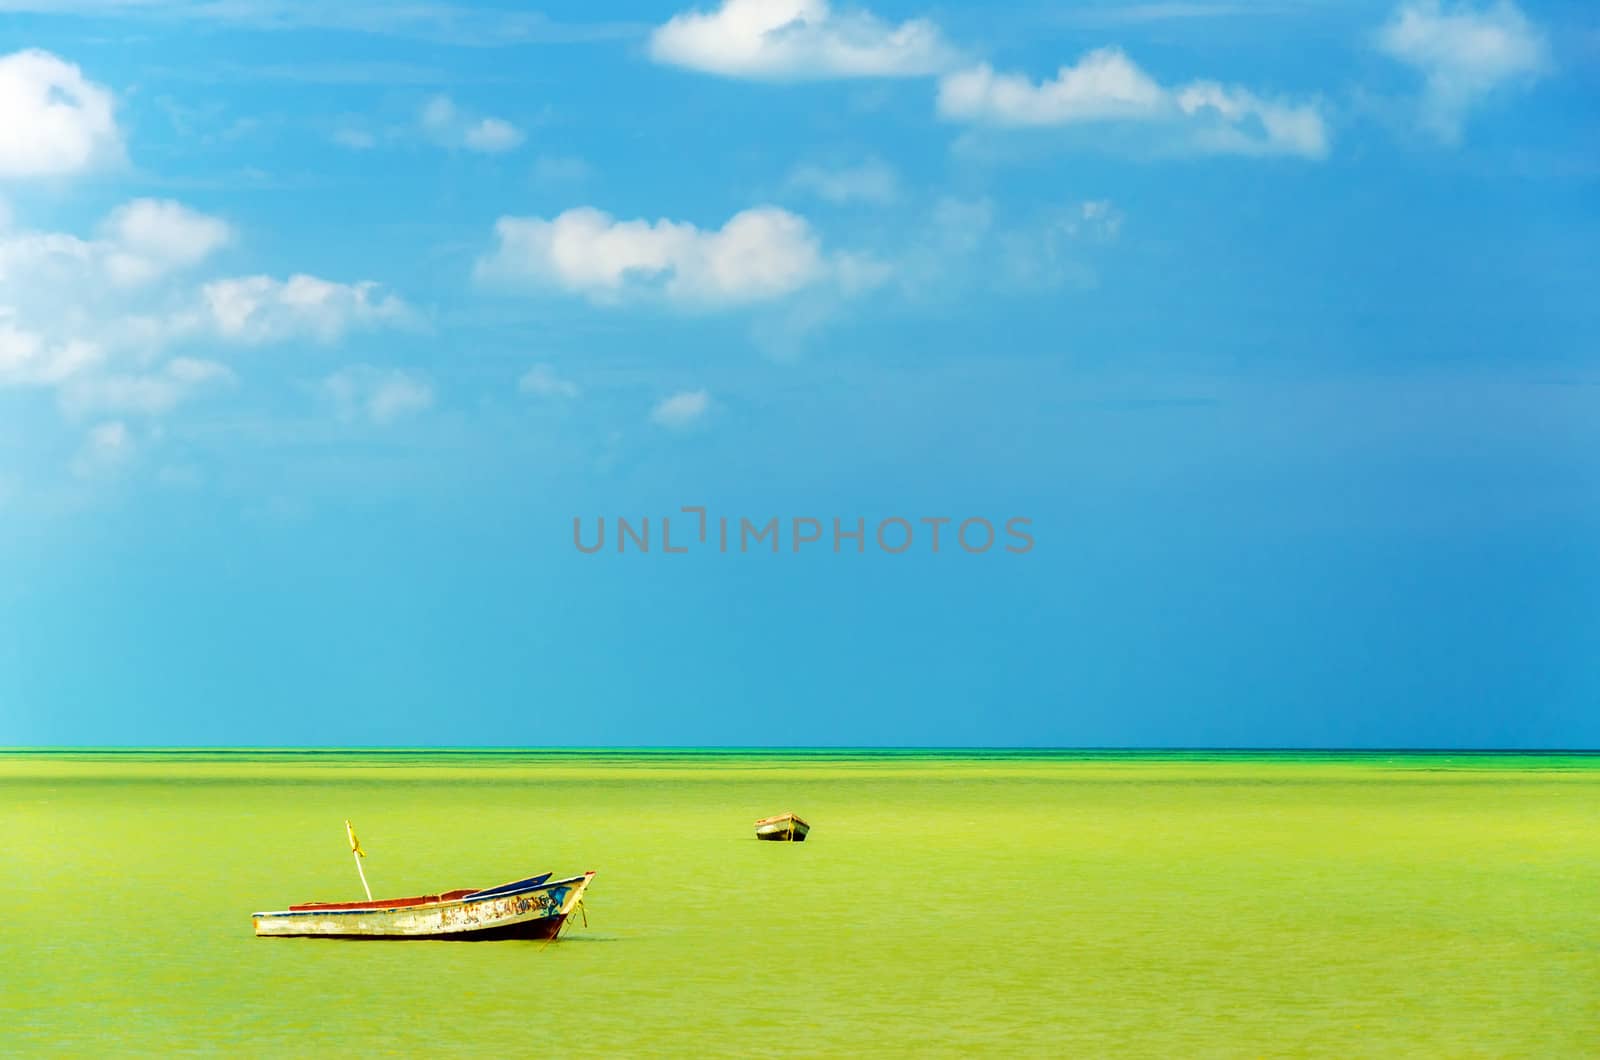 Two boats off the coast in a green sea with a beautiful blue sky